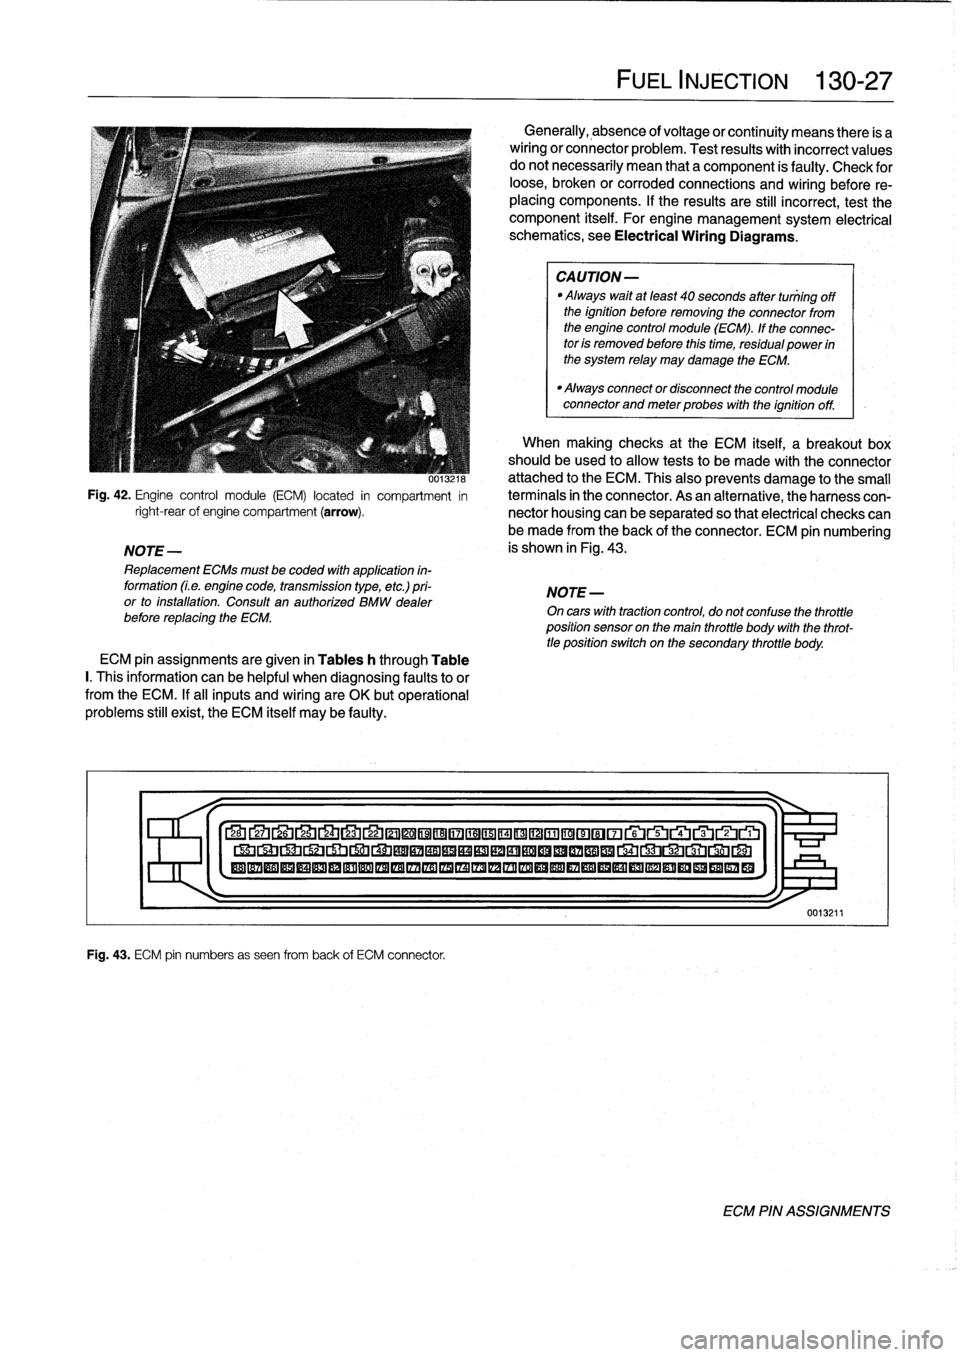 BMW 318i 1997 E36 Workshop Manual 
0013ZIM
Fig
.
42
.
Engine
control
module
(ECM)
located
in
compartment
in
right-rearof
engine
compartment
(arrow)
.

NOTE-

Replacement
ECMs
must
be
coded
with
application
in-
formation
(Le
.
engine
c